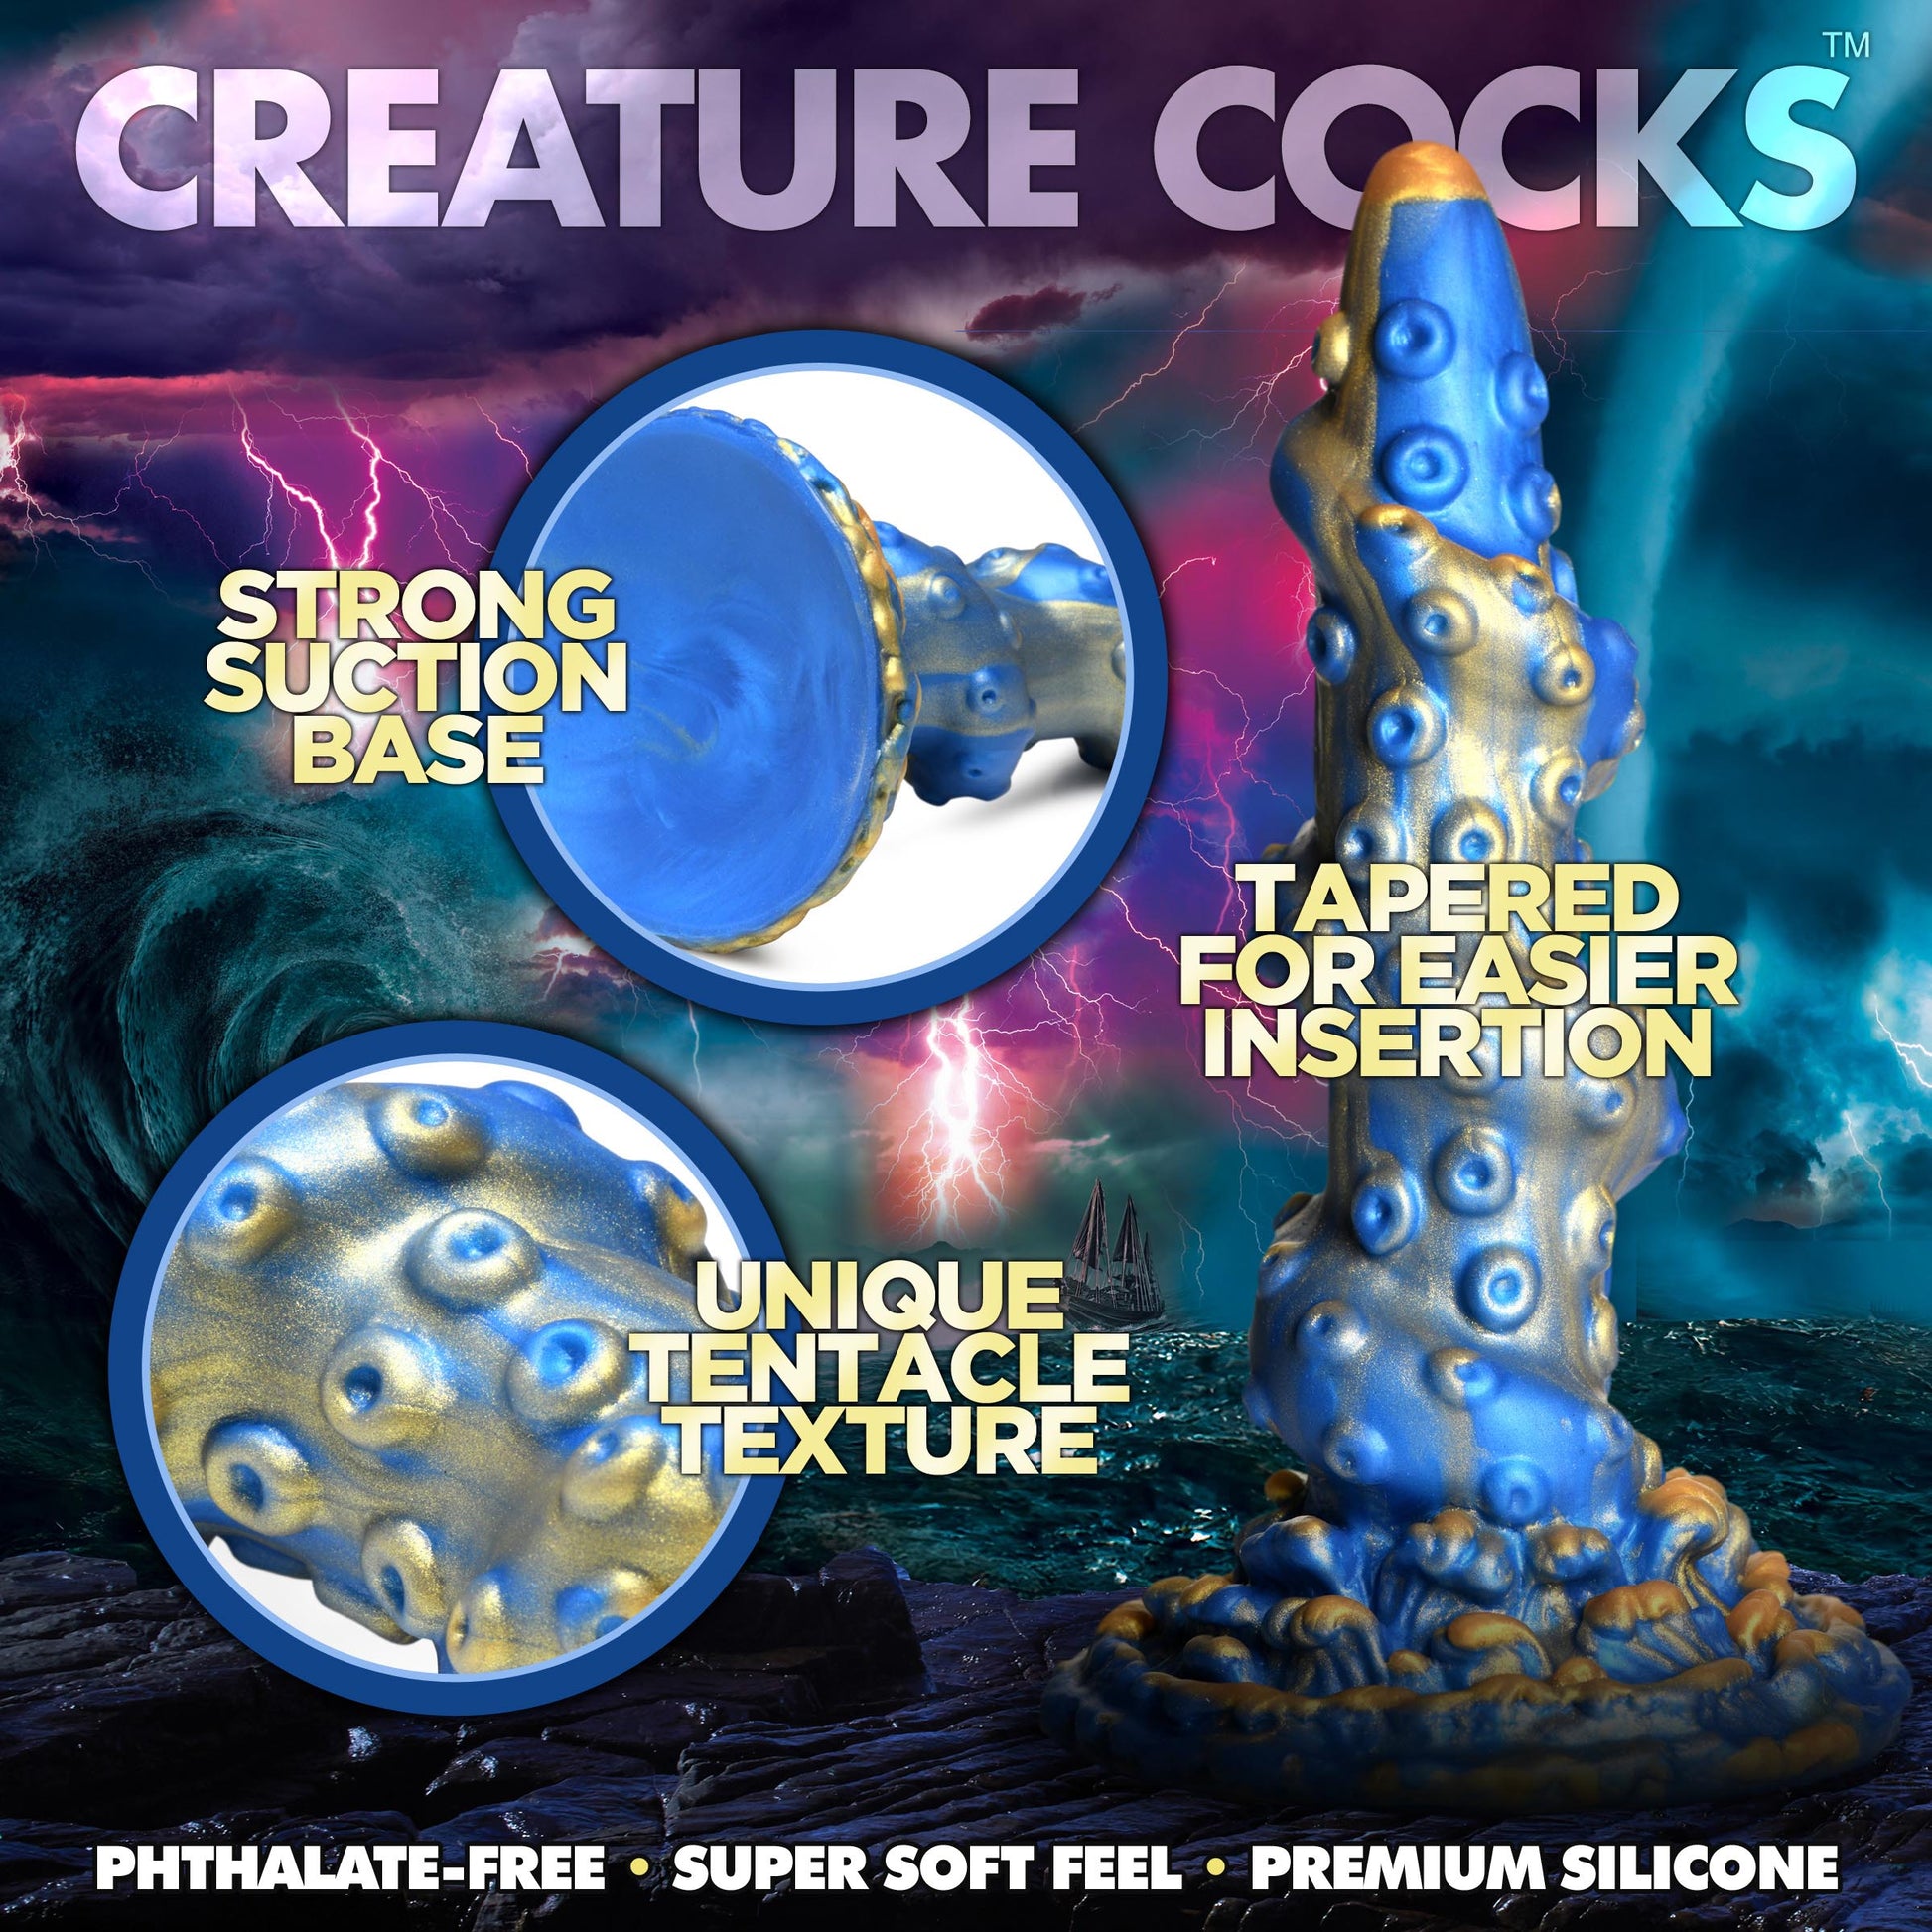 Lord Kraken Tentacled Silicone Creature Dildo - Thorn & Feather